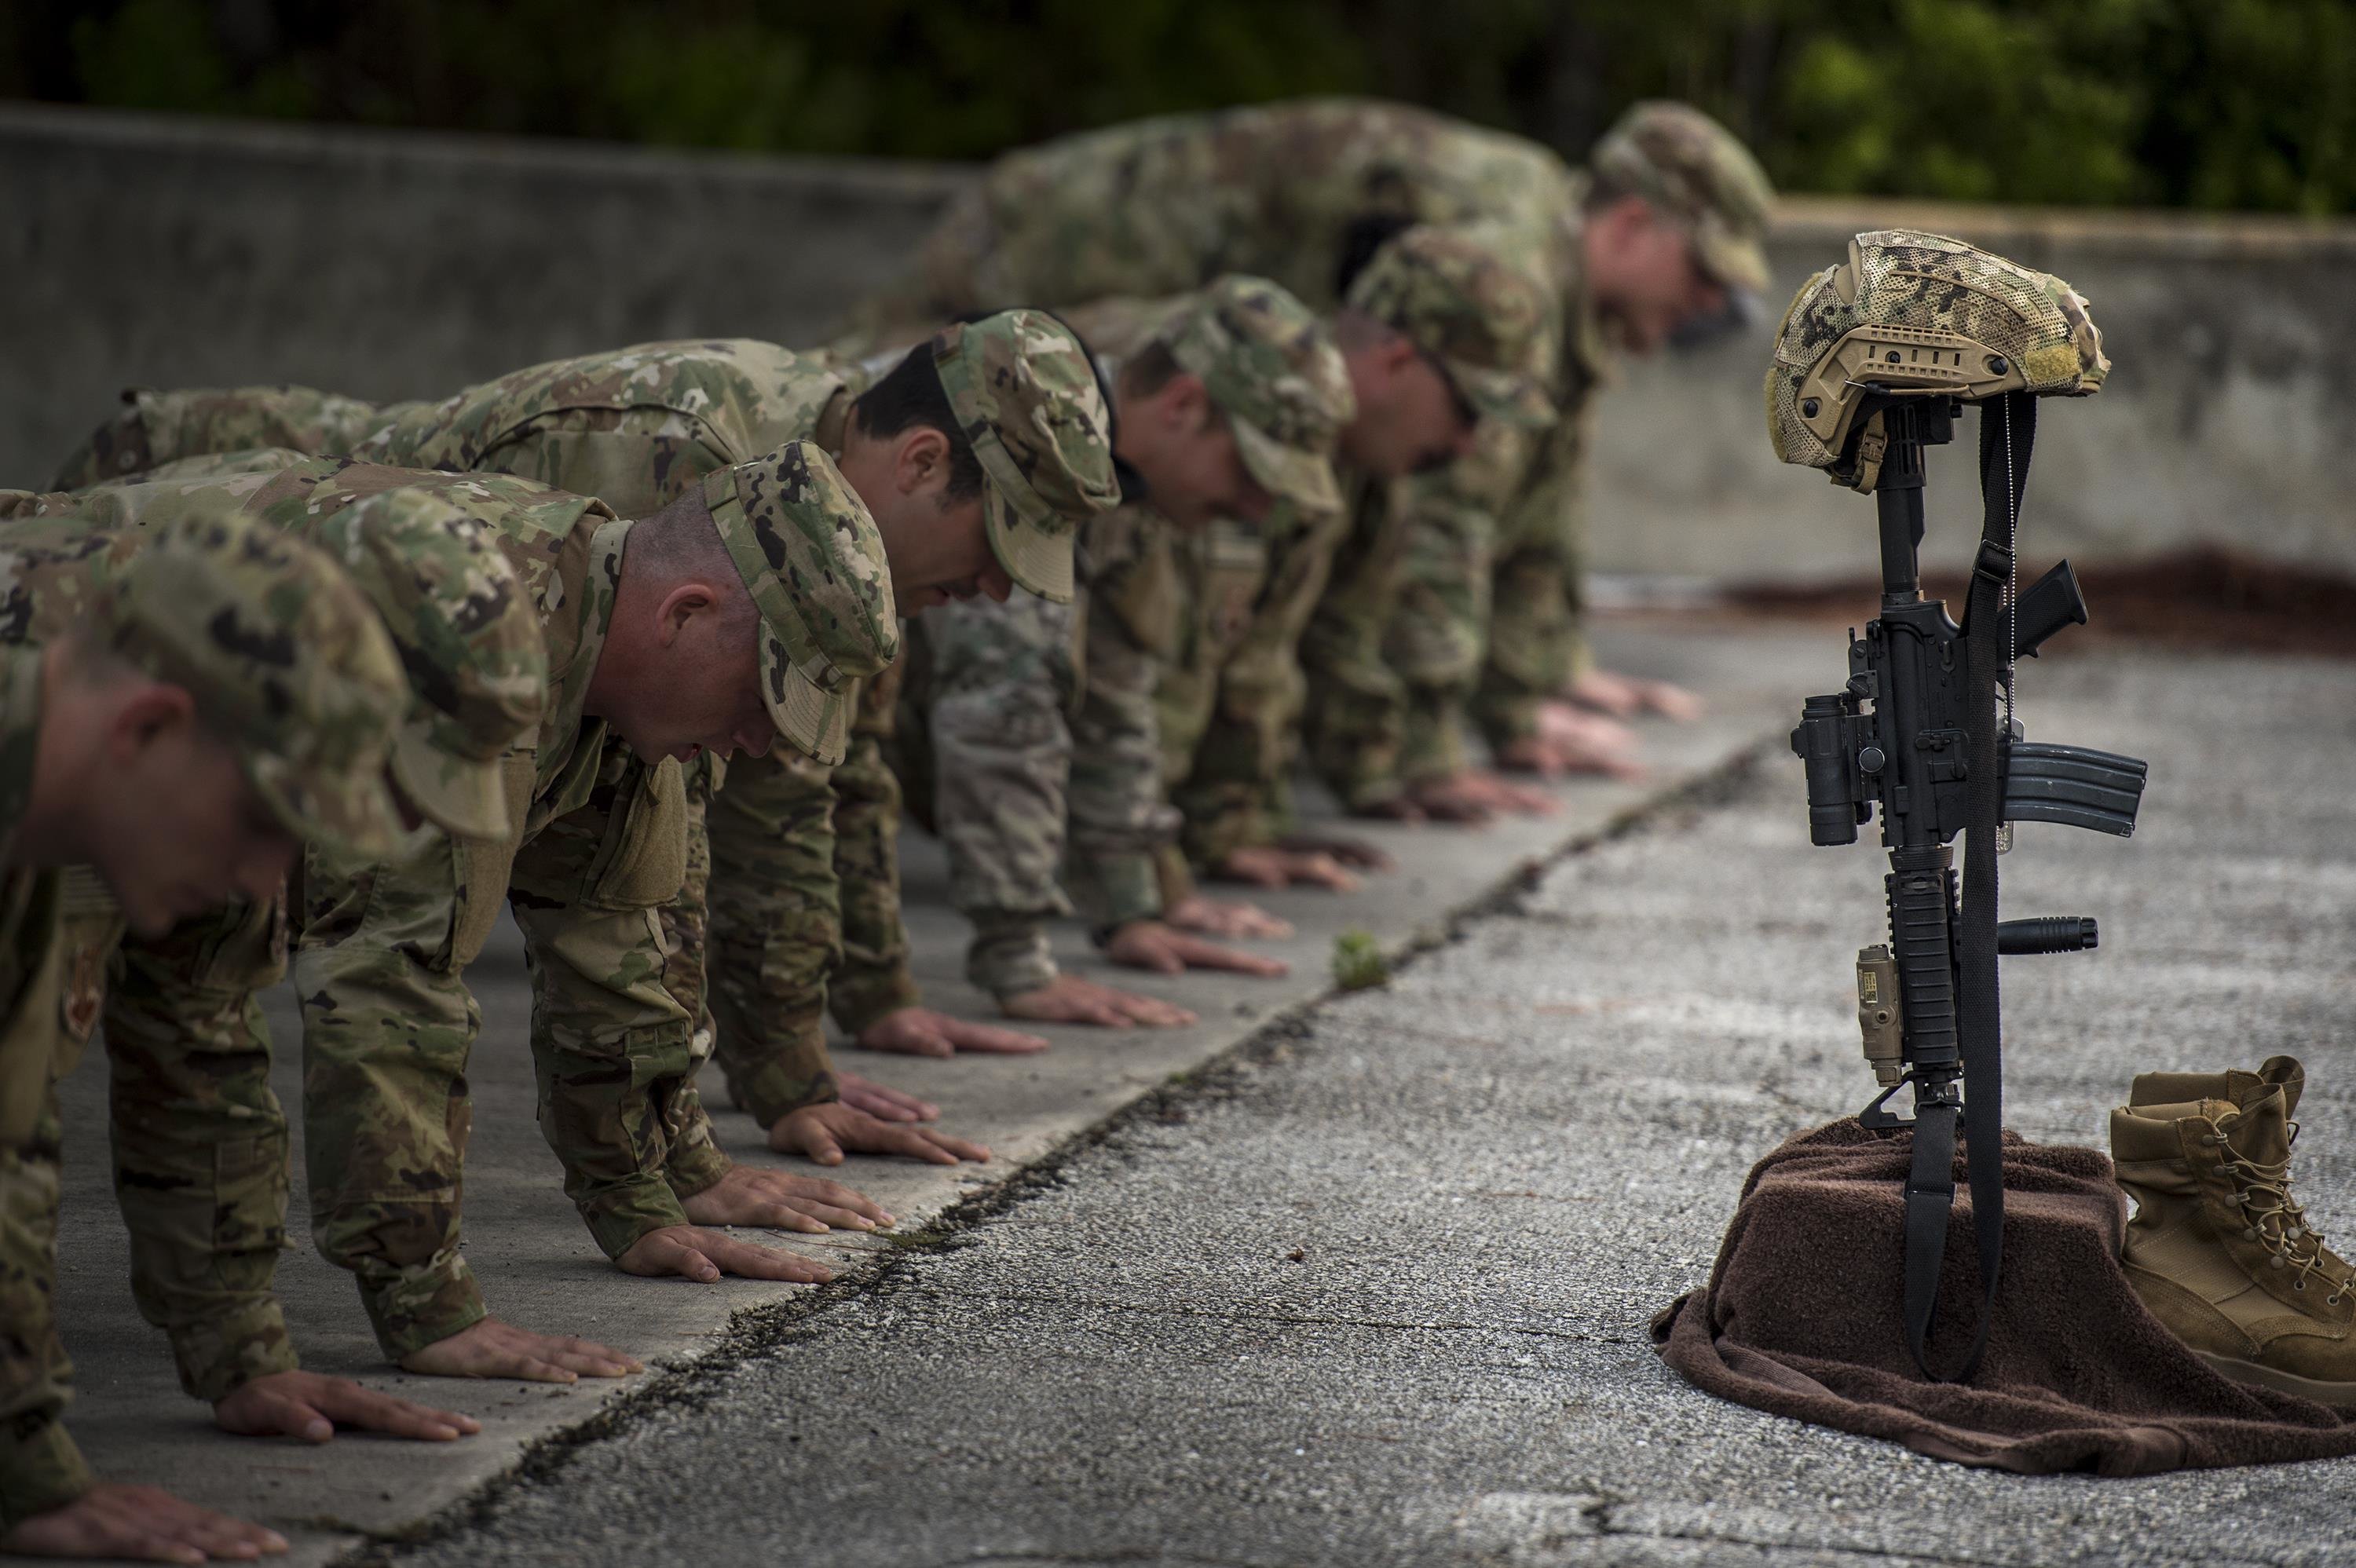 A battlefield cross sits on display during sunrise, April 15, 2016, at Avon Park Air Force Range, Fla. U.S. Air Force Airmen from the 93d Air Ground Operations Wing set up the cross for Lt. Col. William Schroeder. <small>(Photo by Senior Airman Ryan Callaghan)</small>